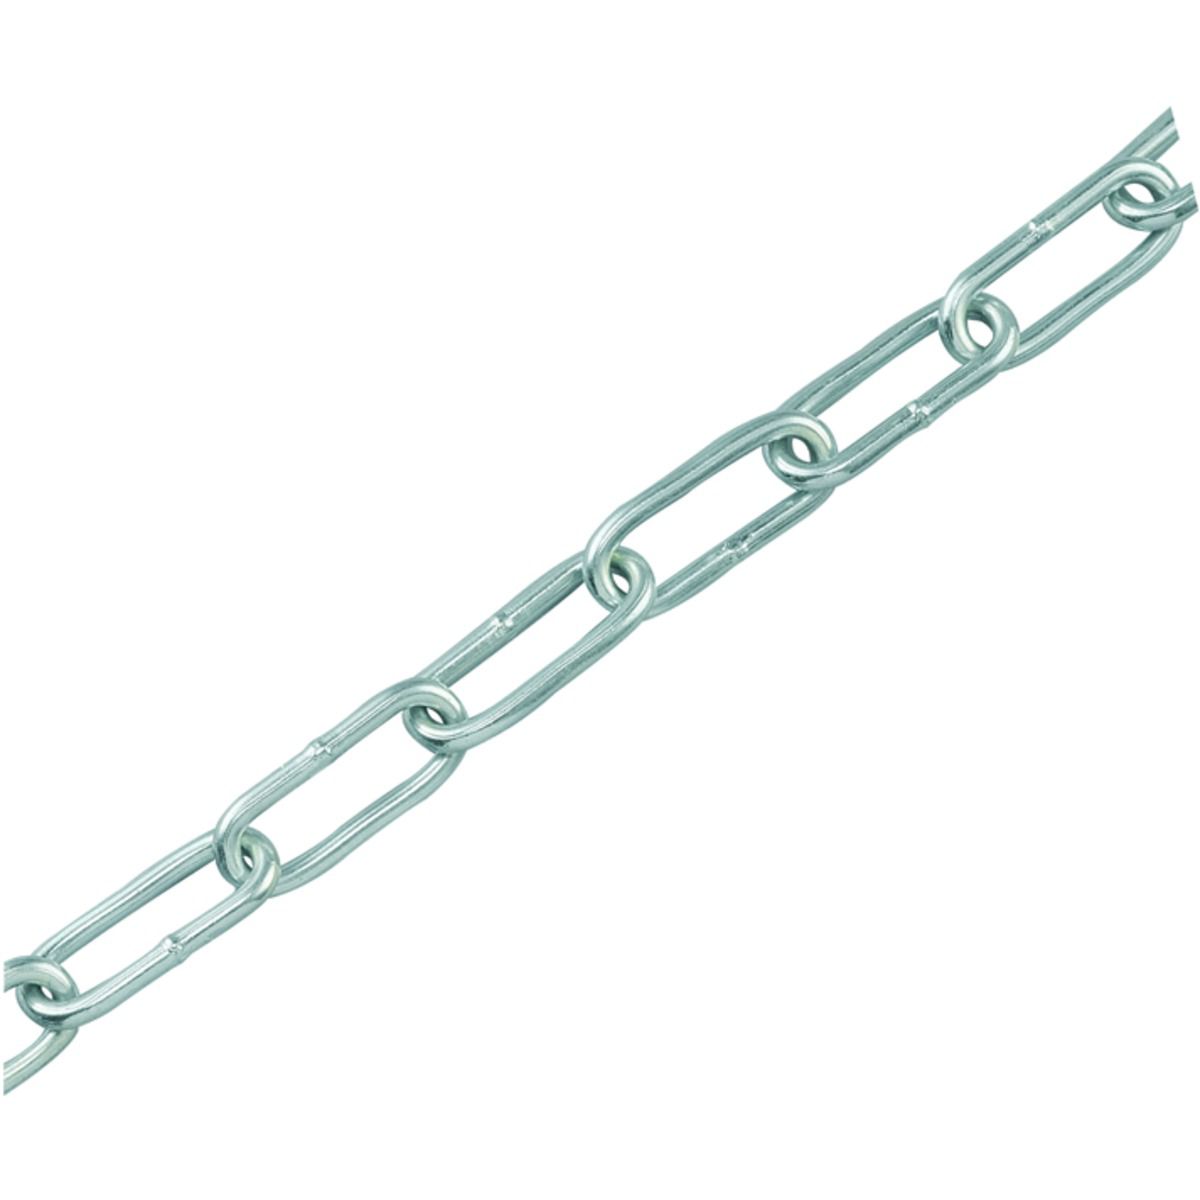 Image of Wickes Zinc Plated Steel Welded Chain - 4 x 32mm x 2m